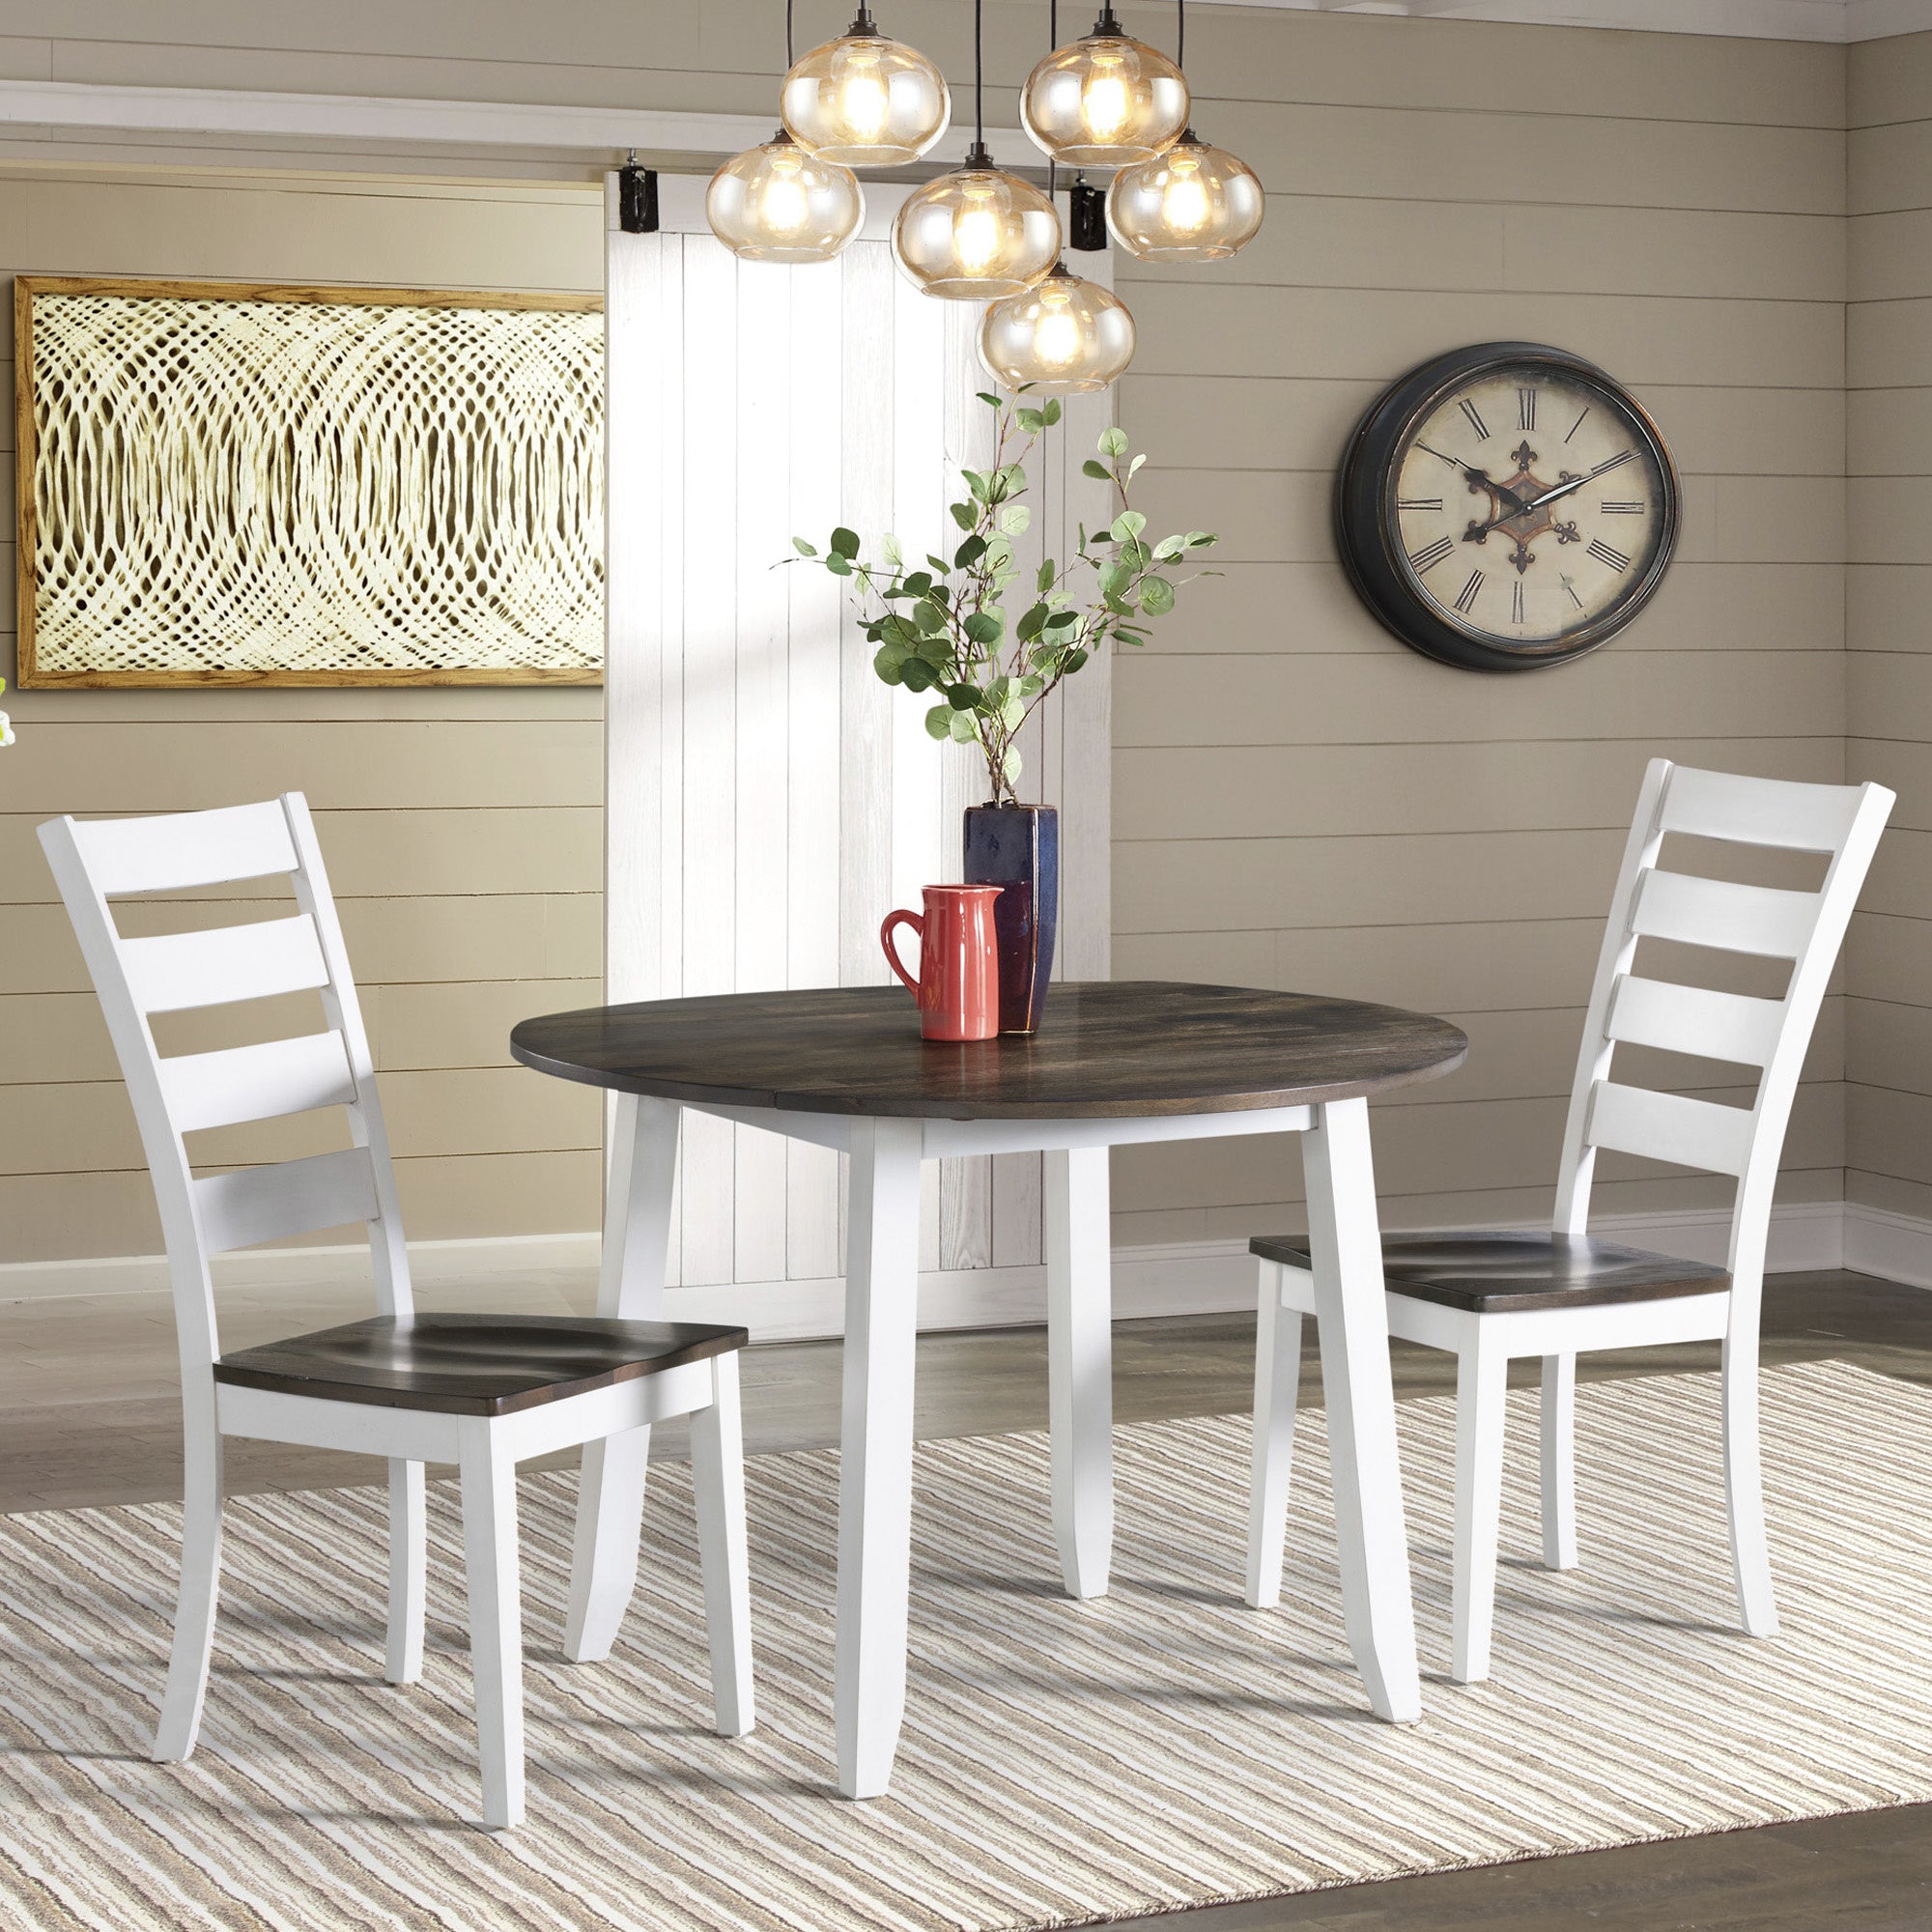 Intercon Kona Drop Leaf Dining Table in Grey and White - Beachcomber Home  Leisure